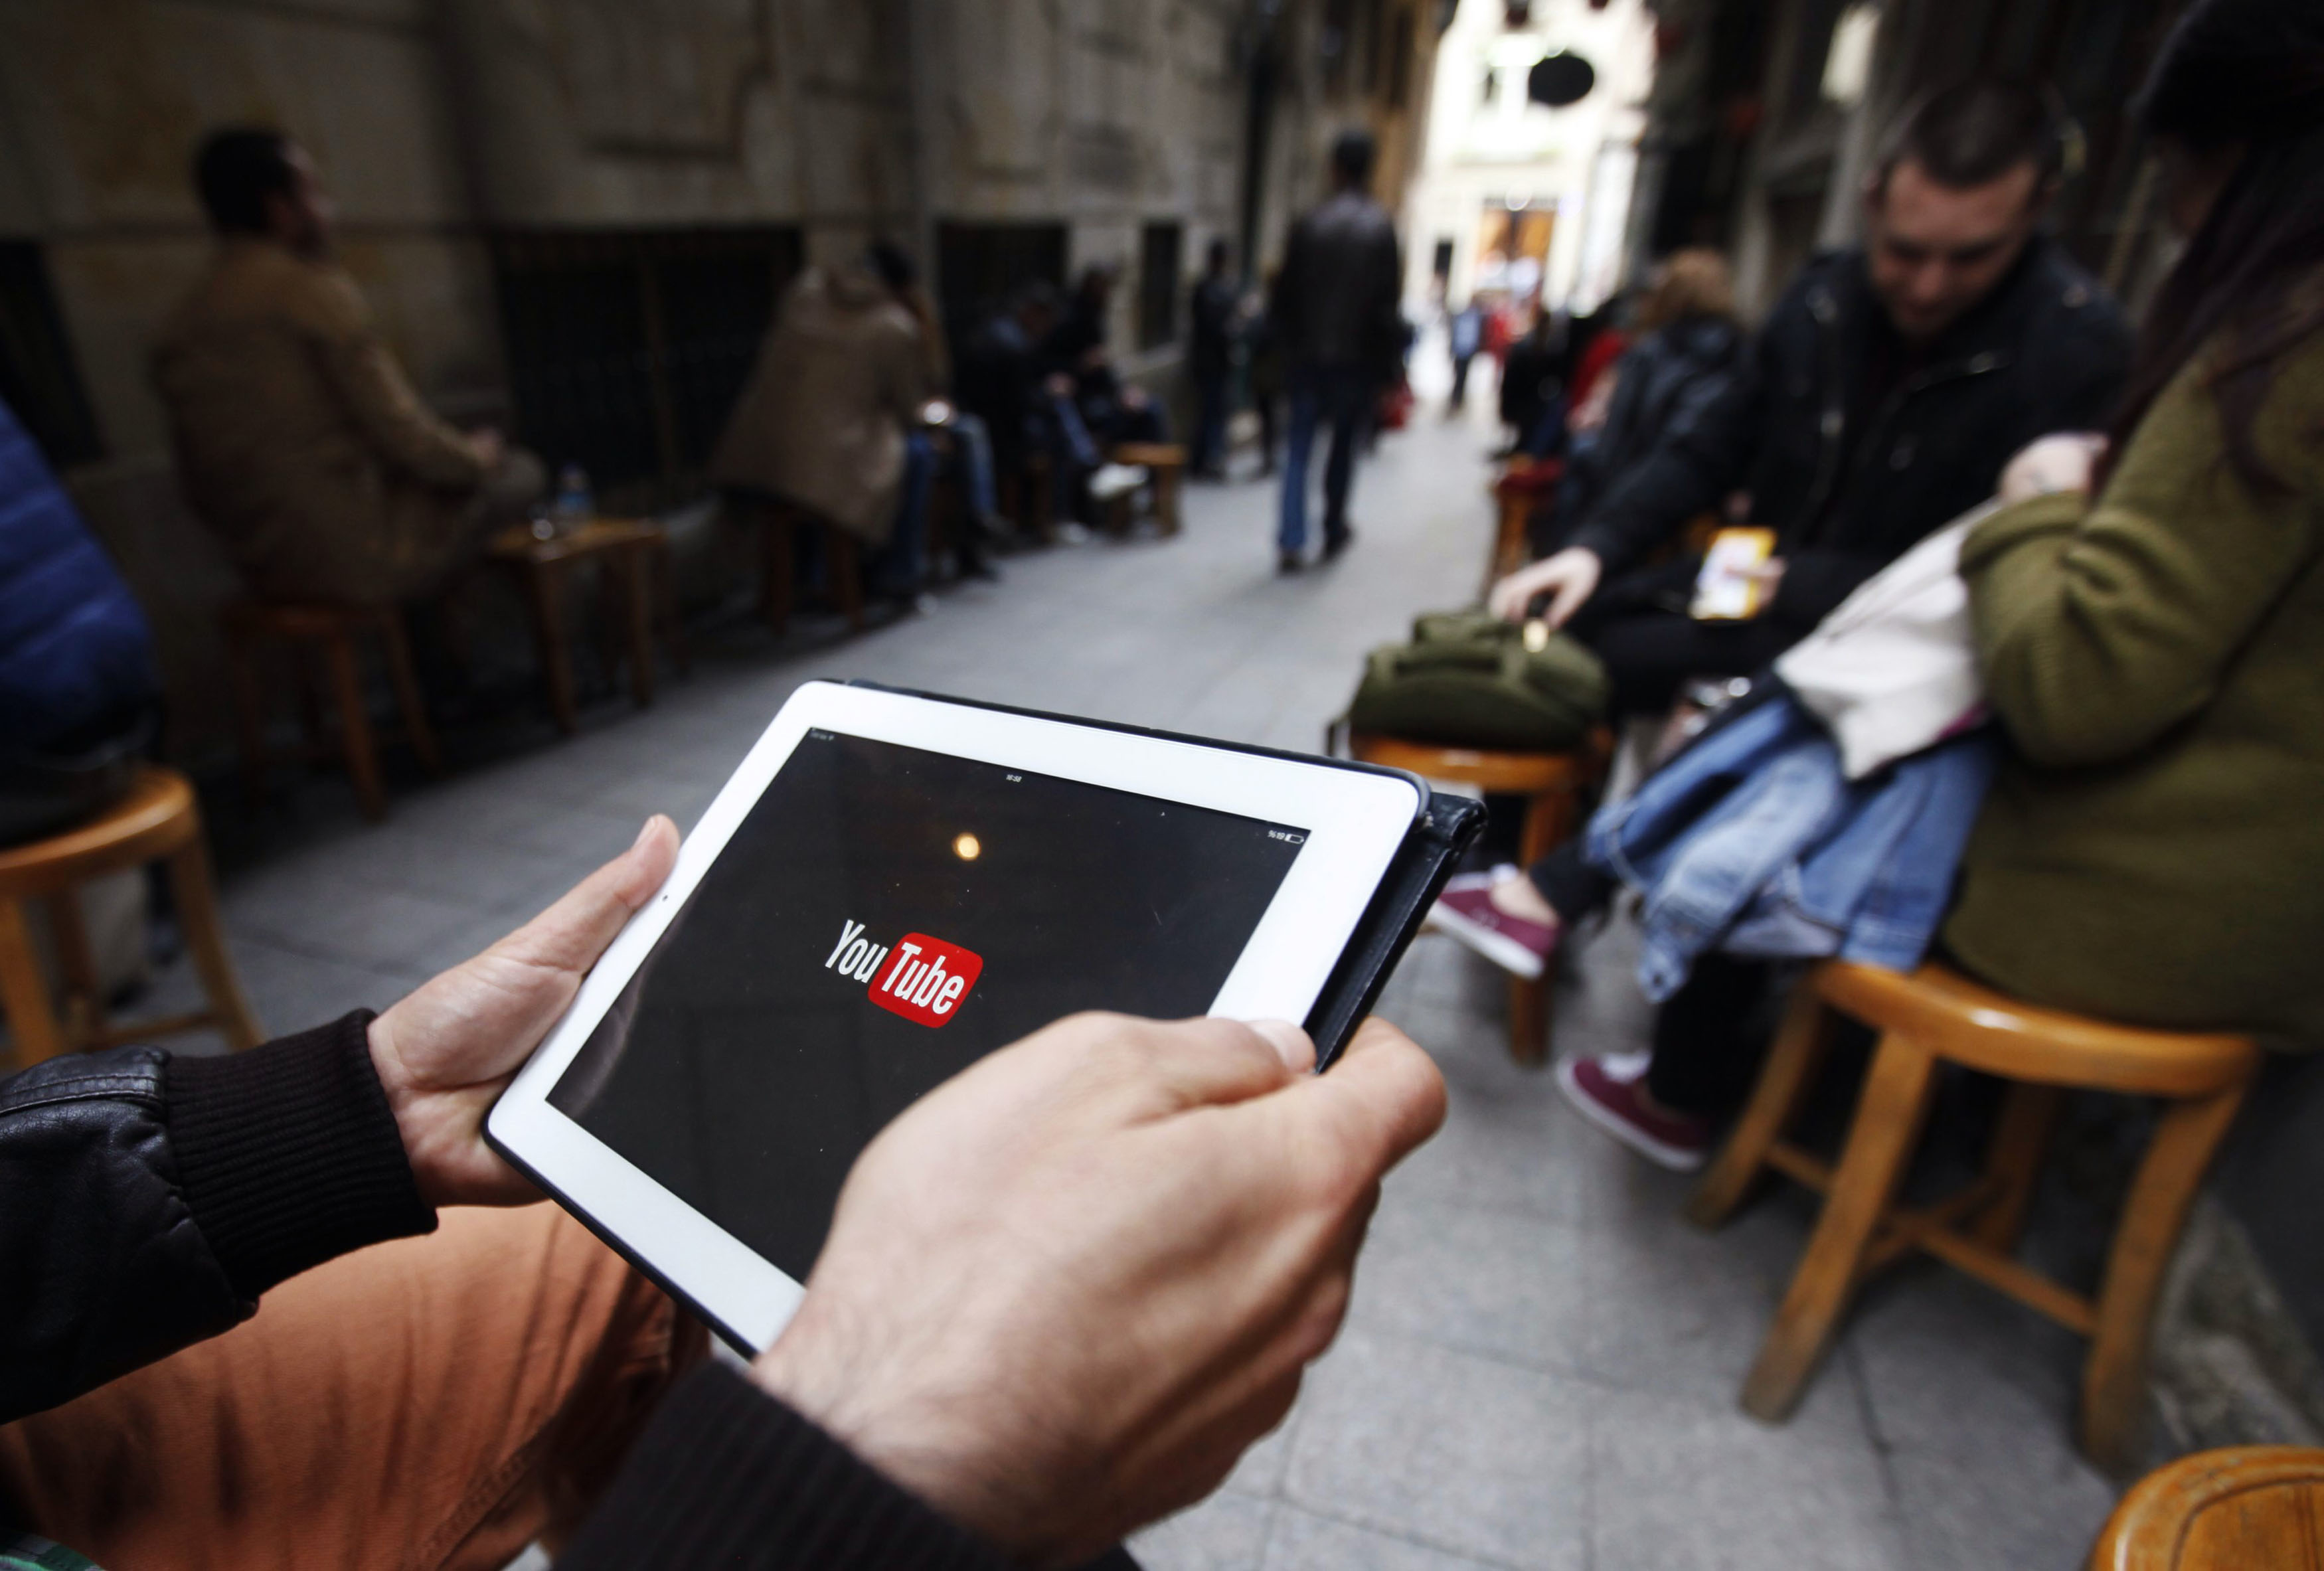 A man tries to get connected to the youtube web site with his tablet at a cafe in Istanbul